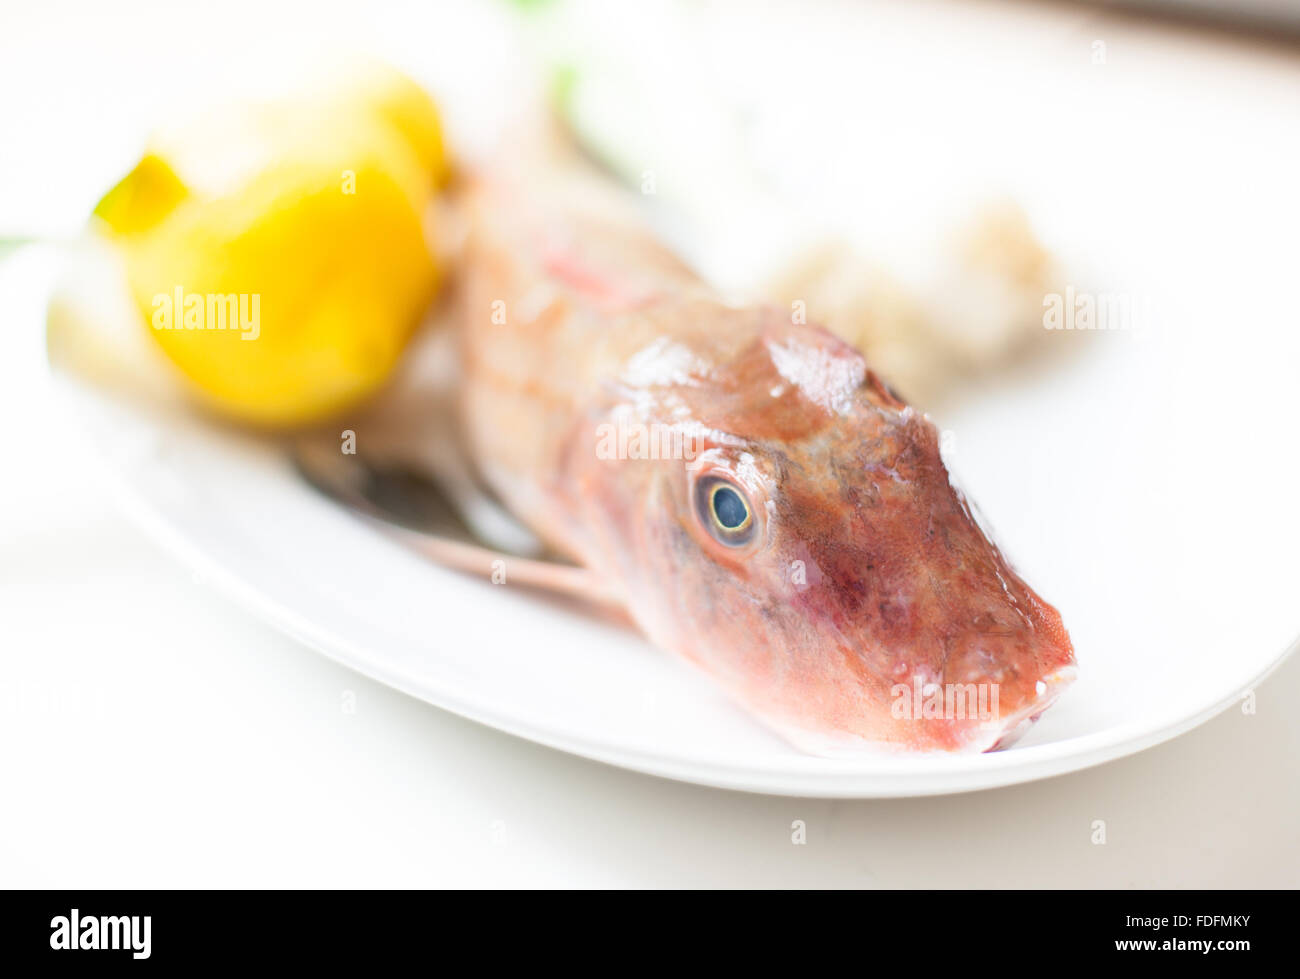 Tub gurnard raw fish head in selective focus with lemon in background Stock Photo